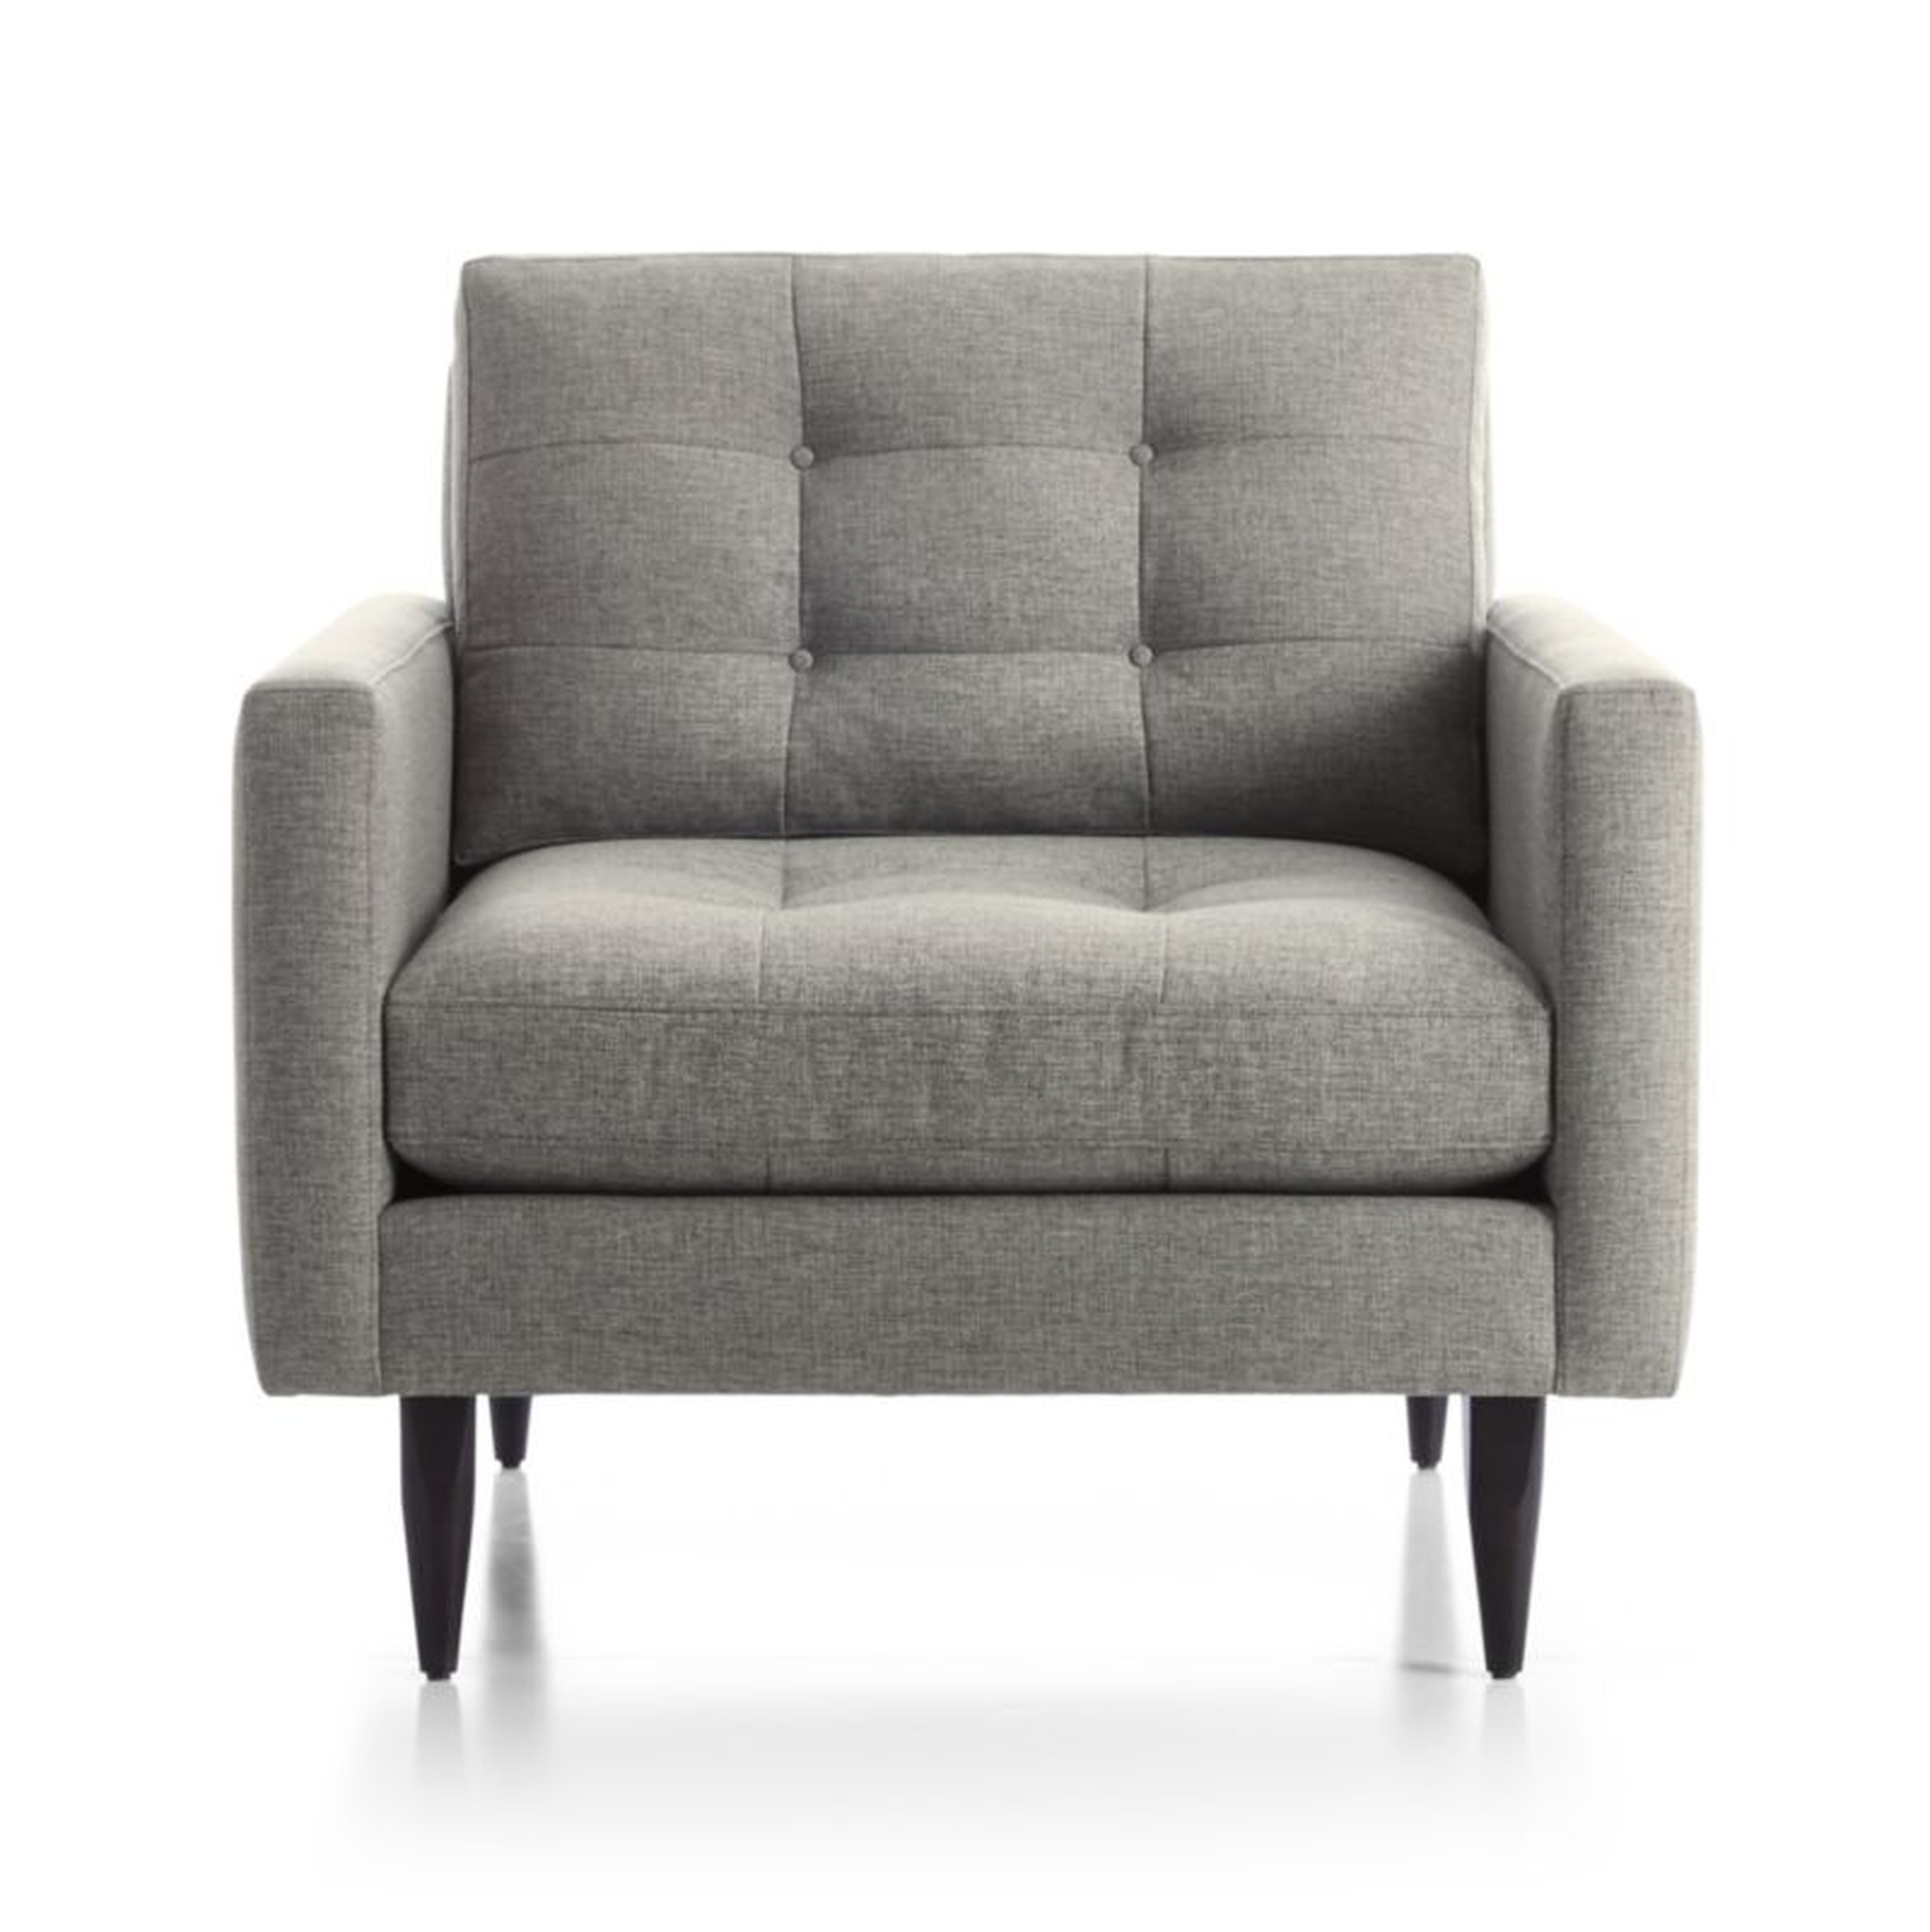 Petrie Chair - Felt Gray - Crate and Barrel